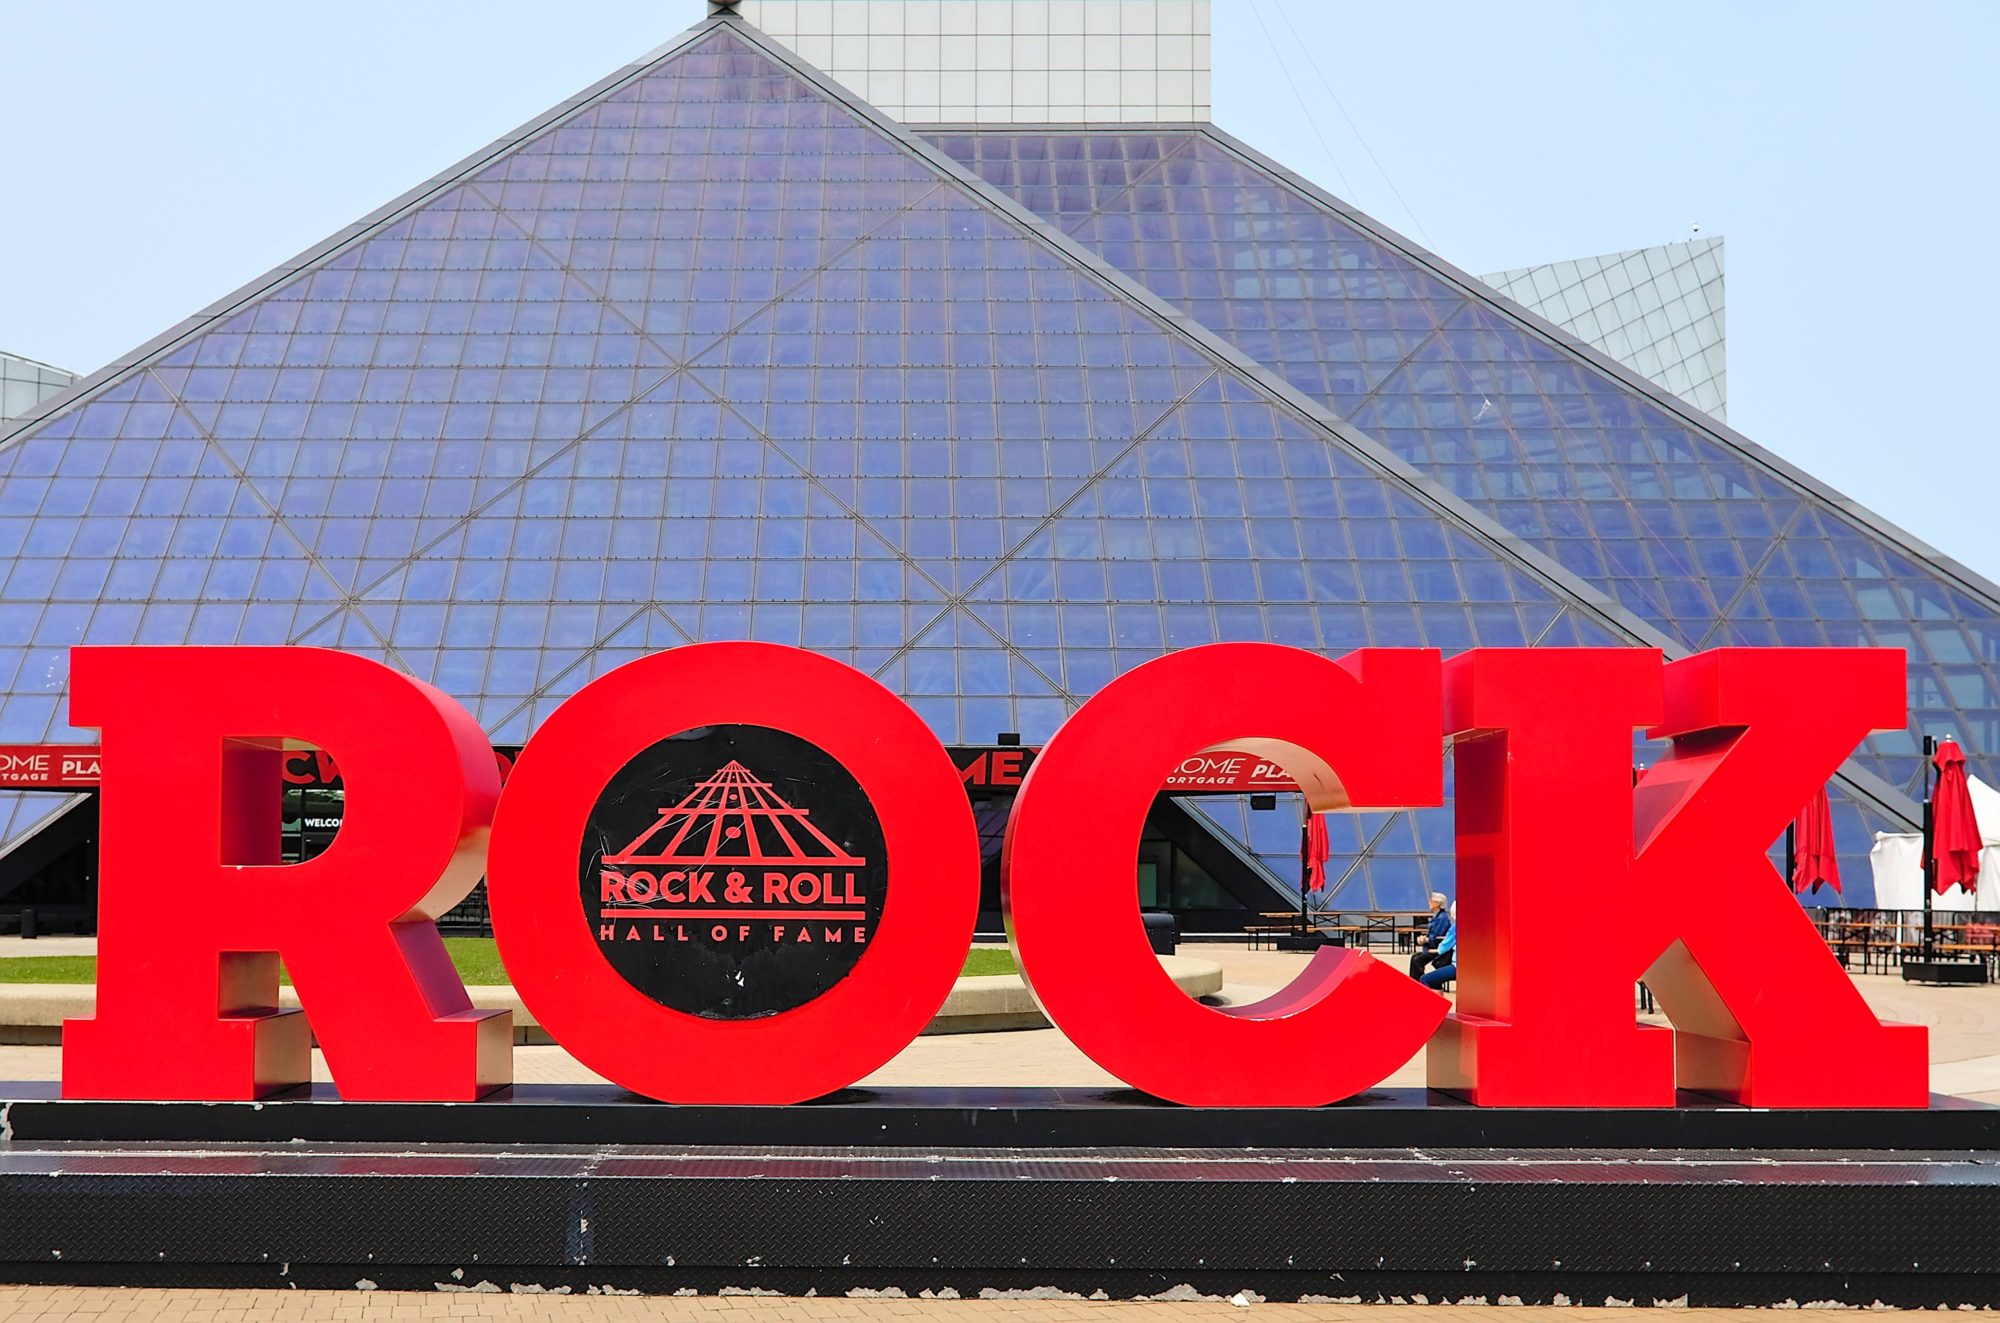 Exterior of the Rock & Roll Hall of Fame